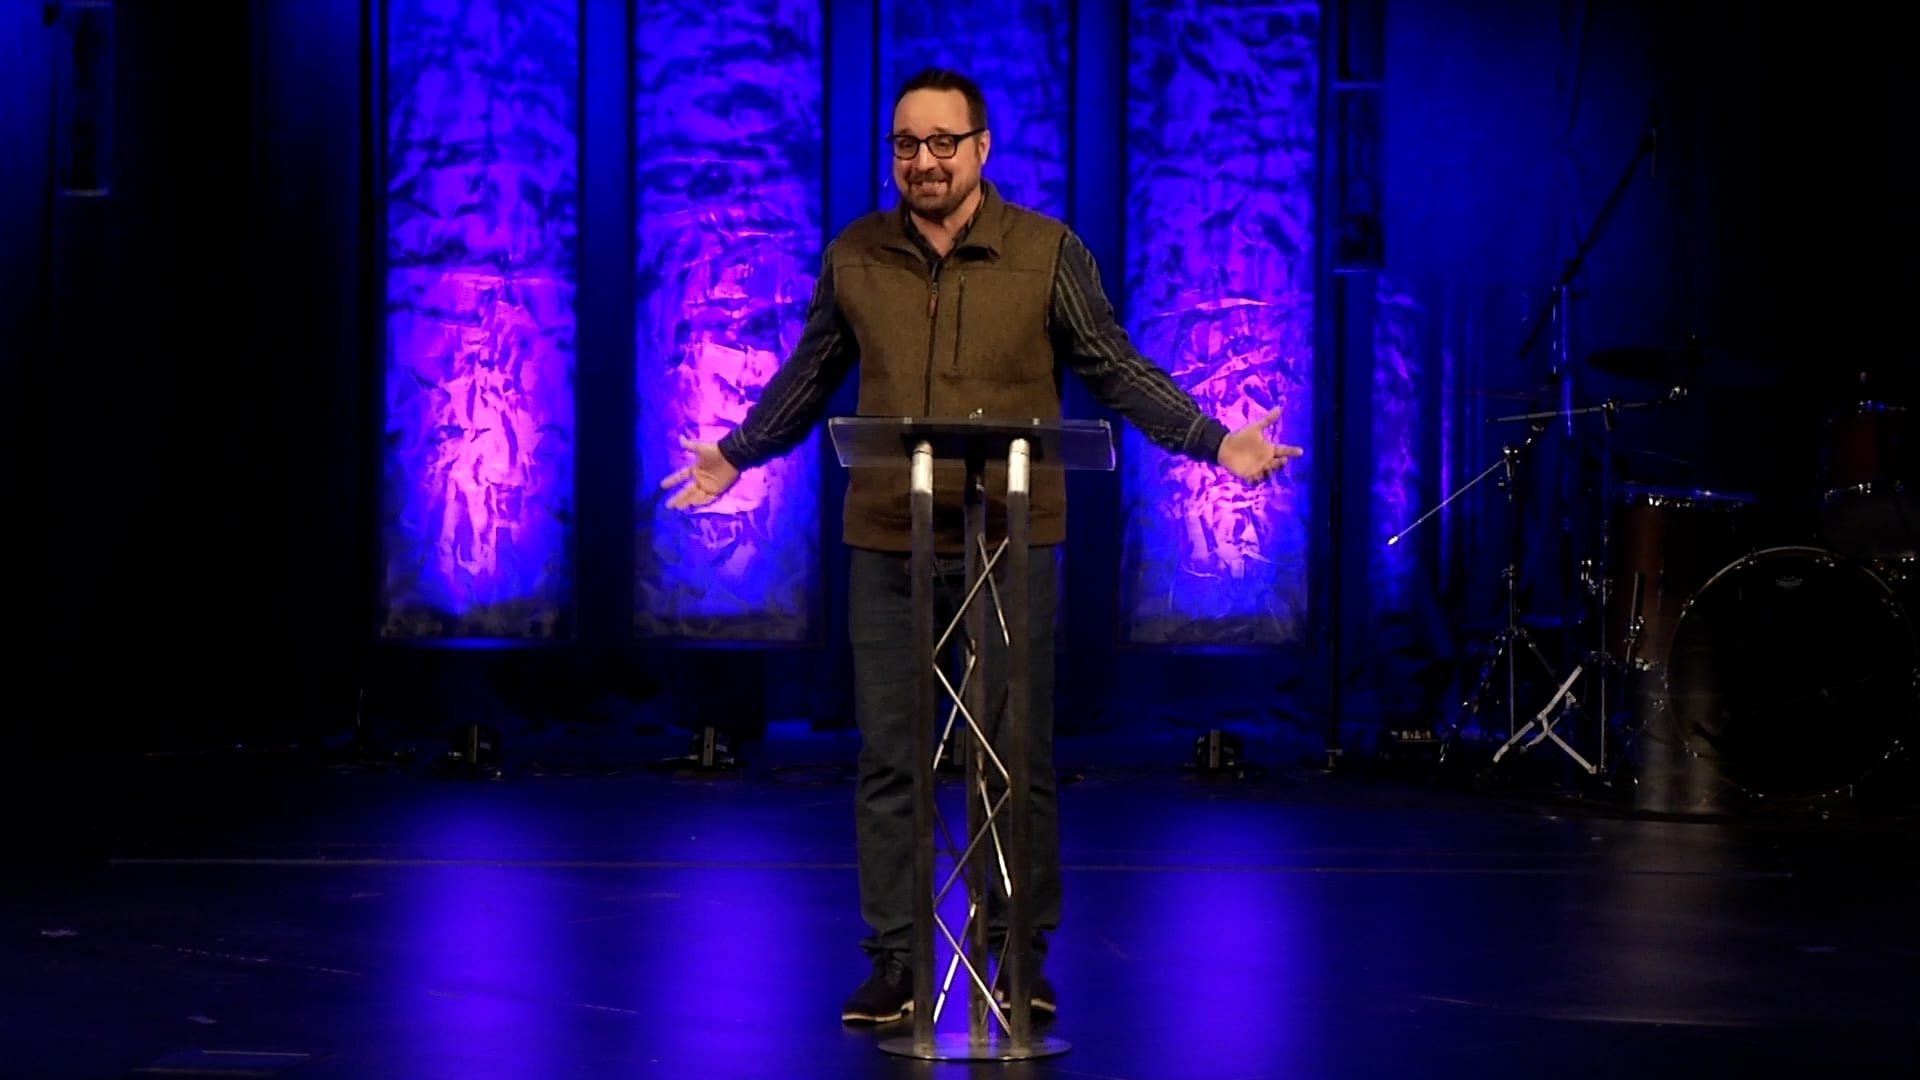 Man preaching with purple lights behind him.